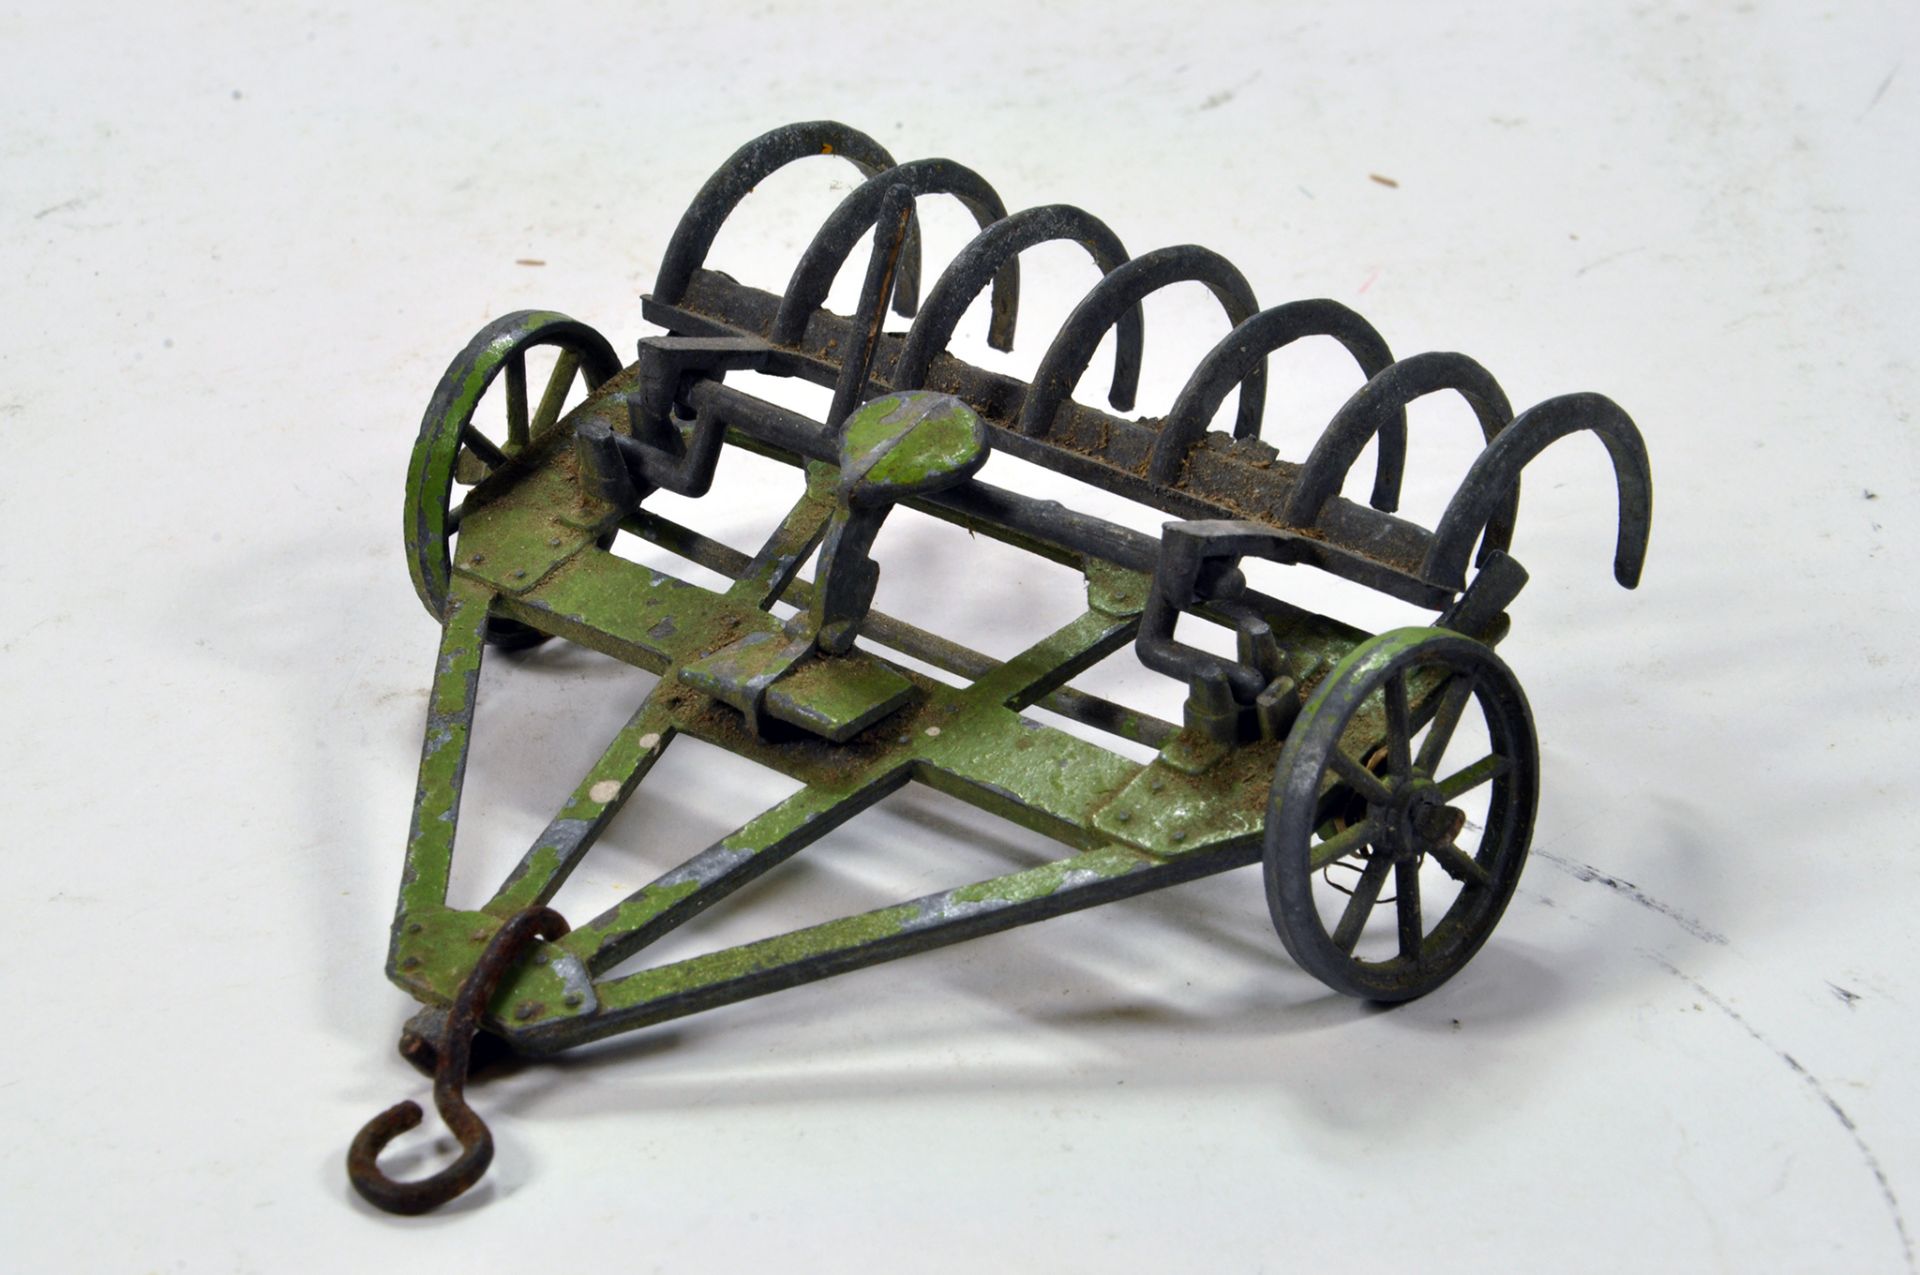 Scarce example of a Moko Farm Rake in green. Some cleaning needed, hook replaced otherwise a rare